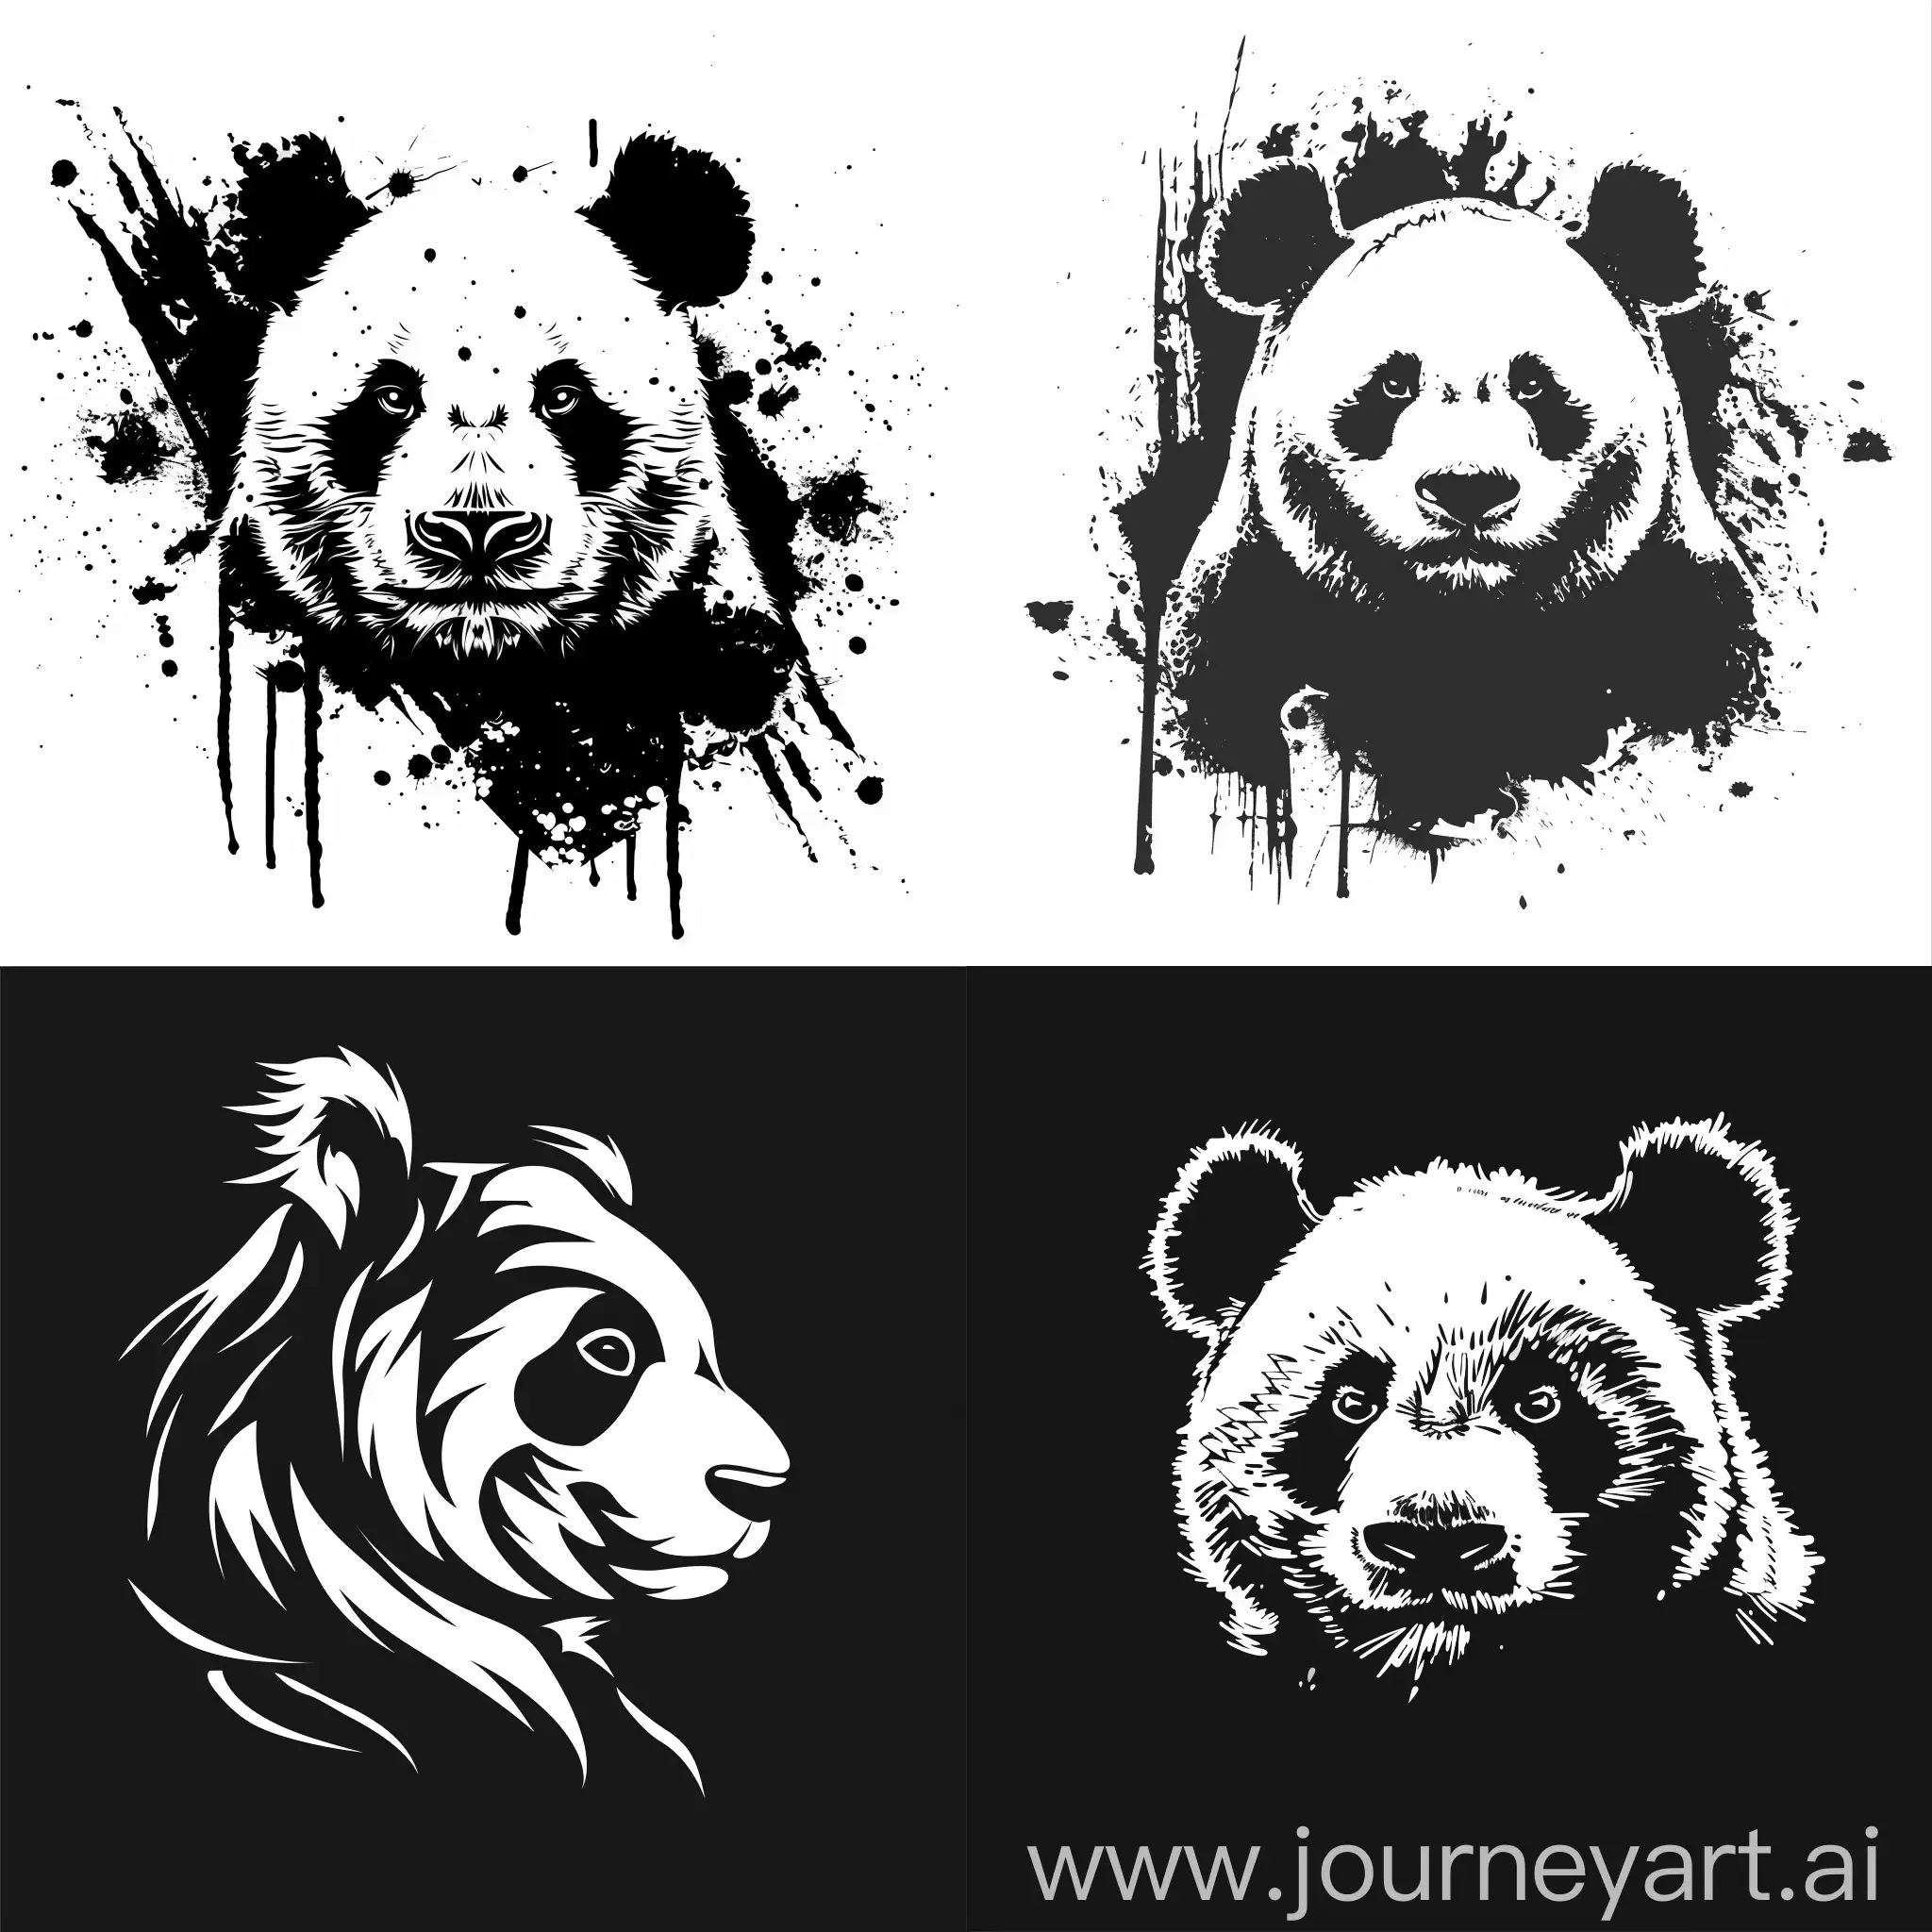 a black and white vector logo of an artistic panda